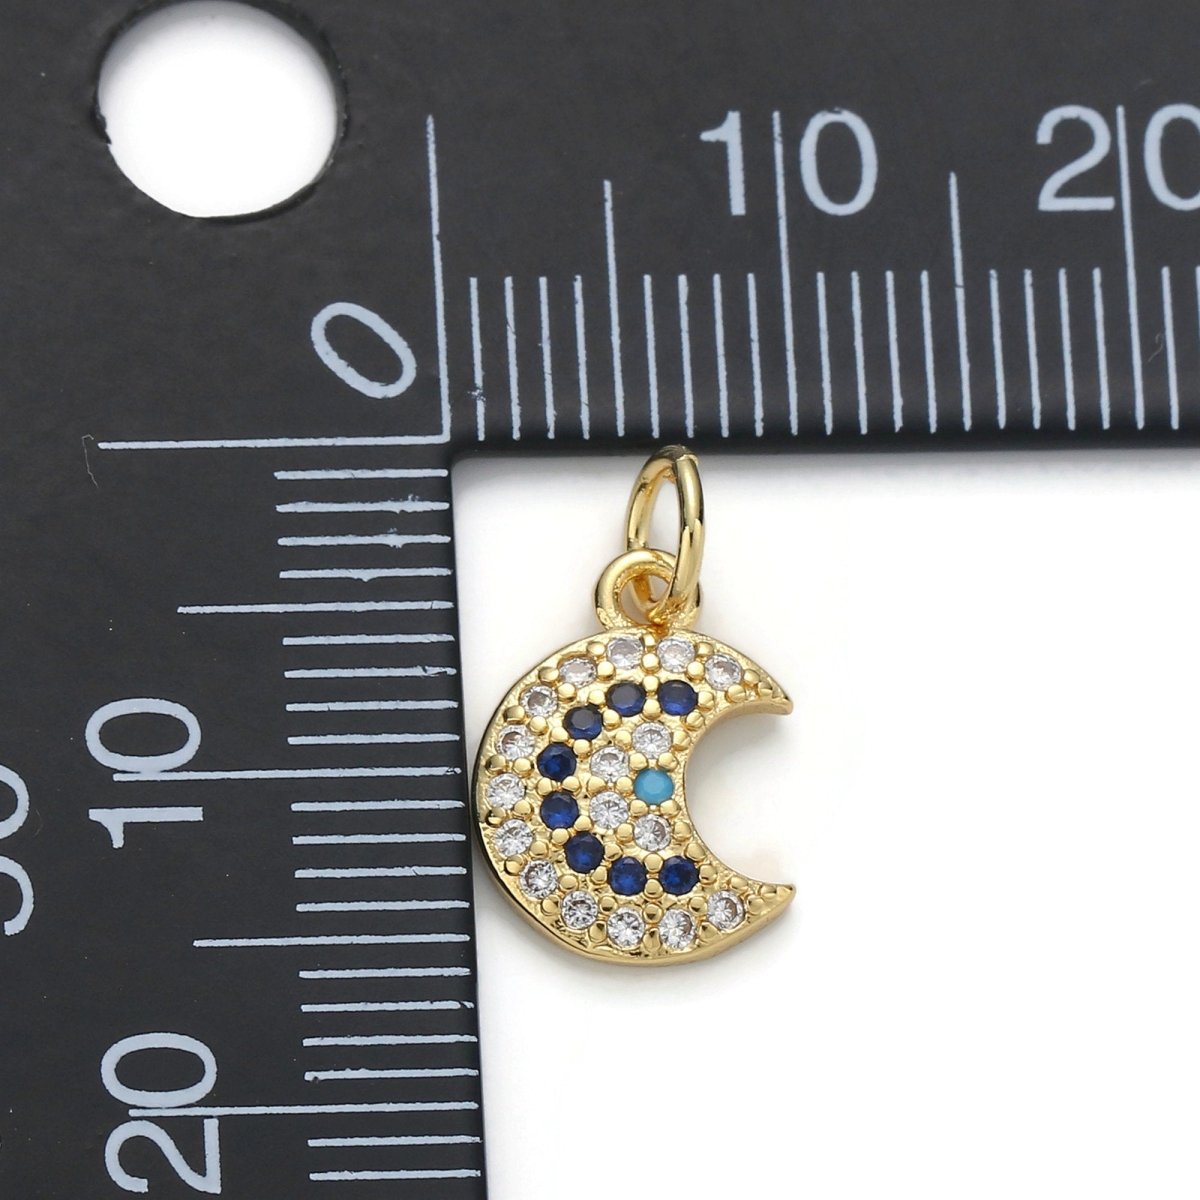 24k Gold Filled Micro Pave Moon Charm, Cubic Zirconia Moon Pendant Charm, Gold Filled Charm, For DIY Jewelry D-044 - DLUXCA